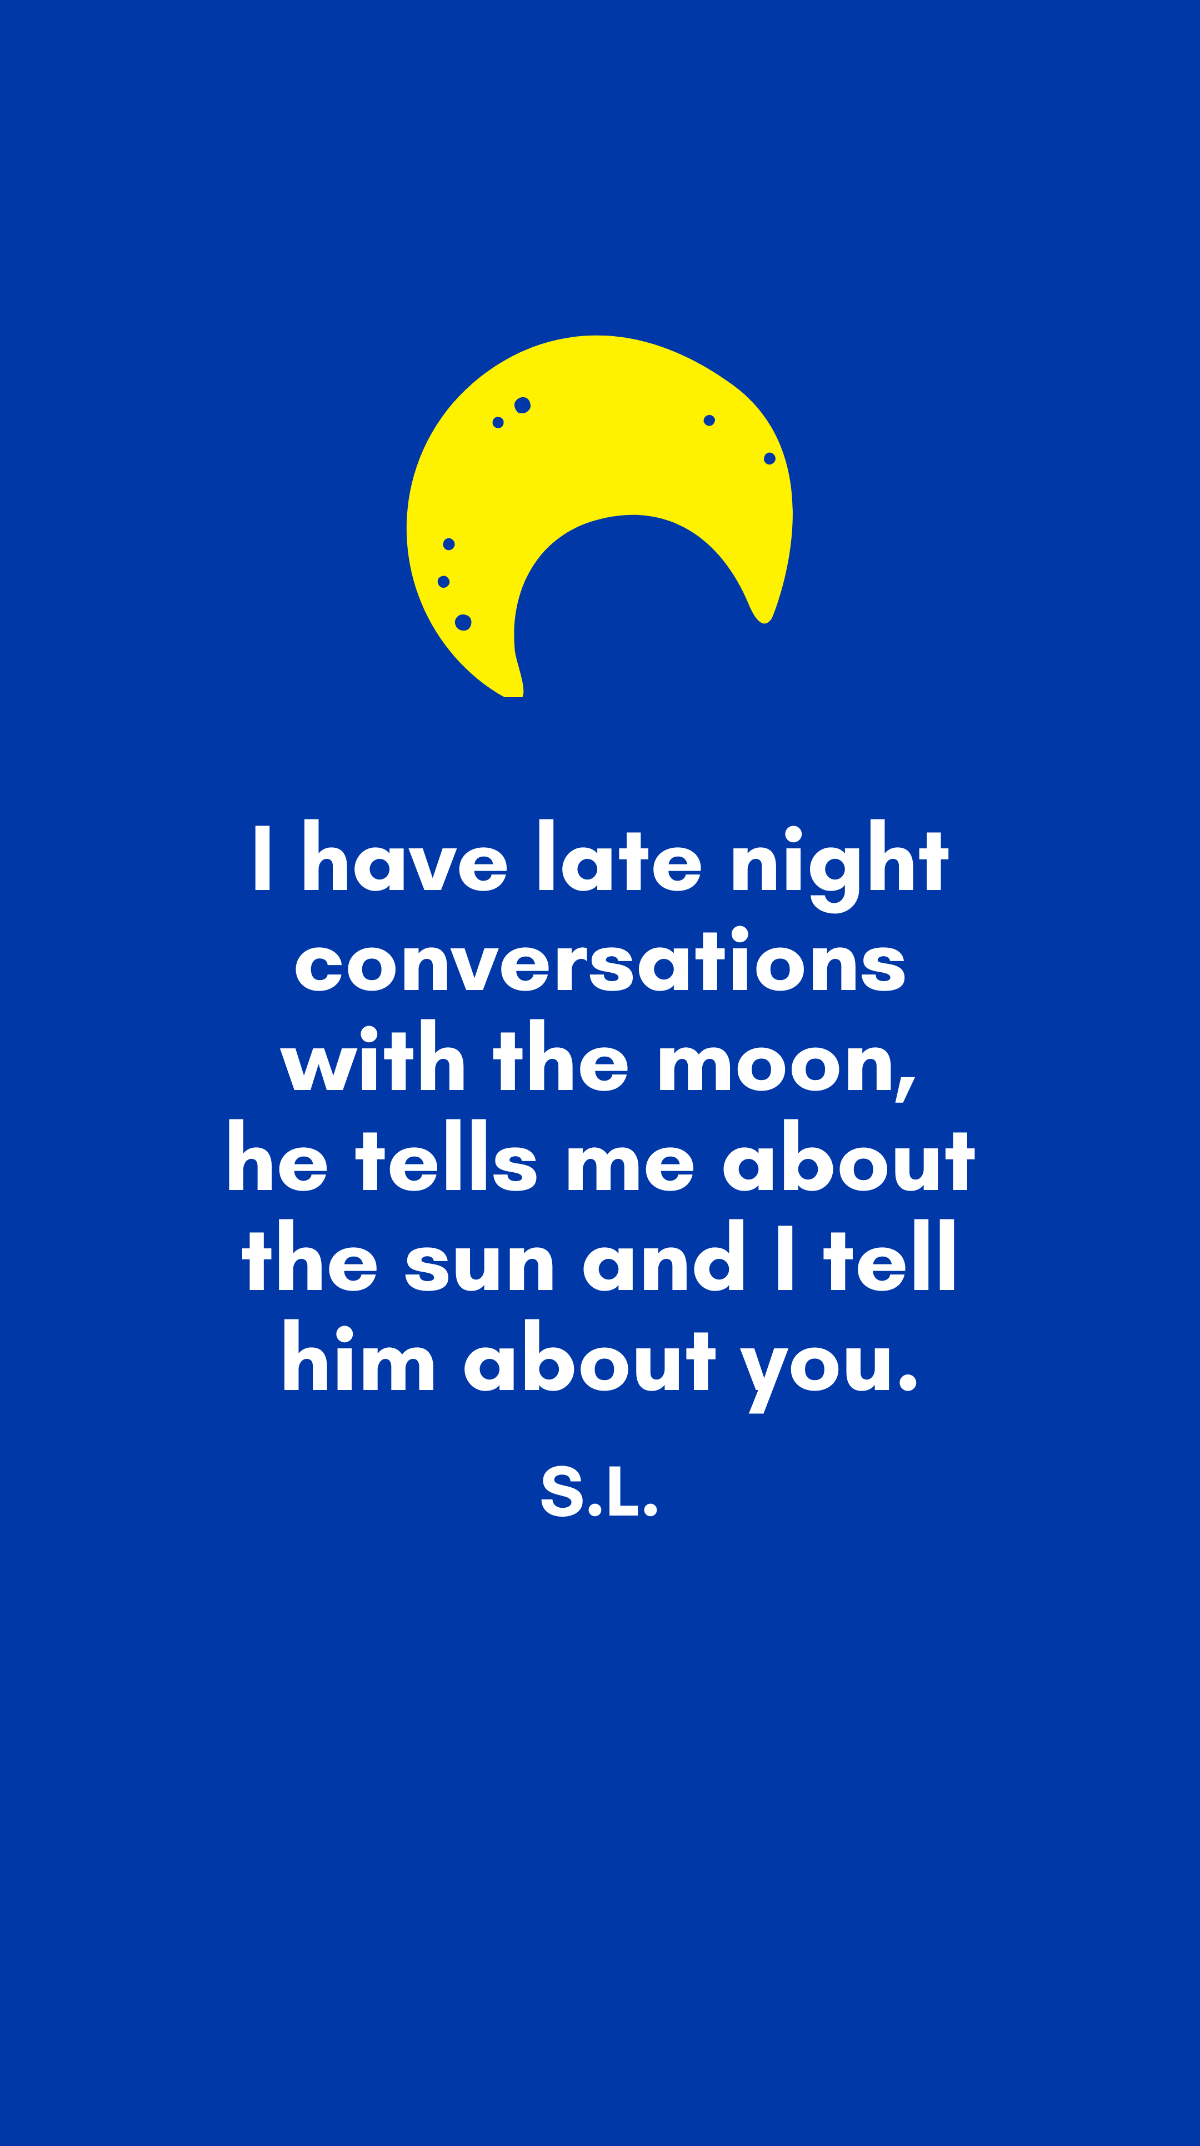 S.L. - I have late night conversations with the moon, he tells me about the sun and I tell him about you.